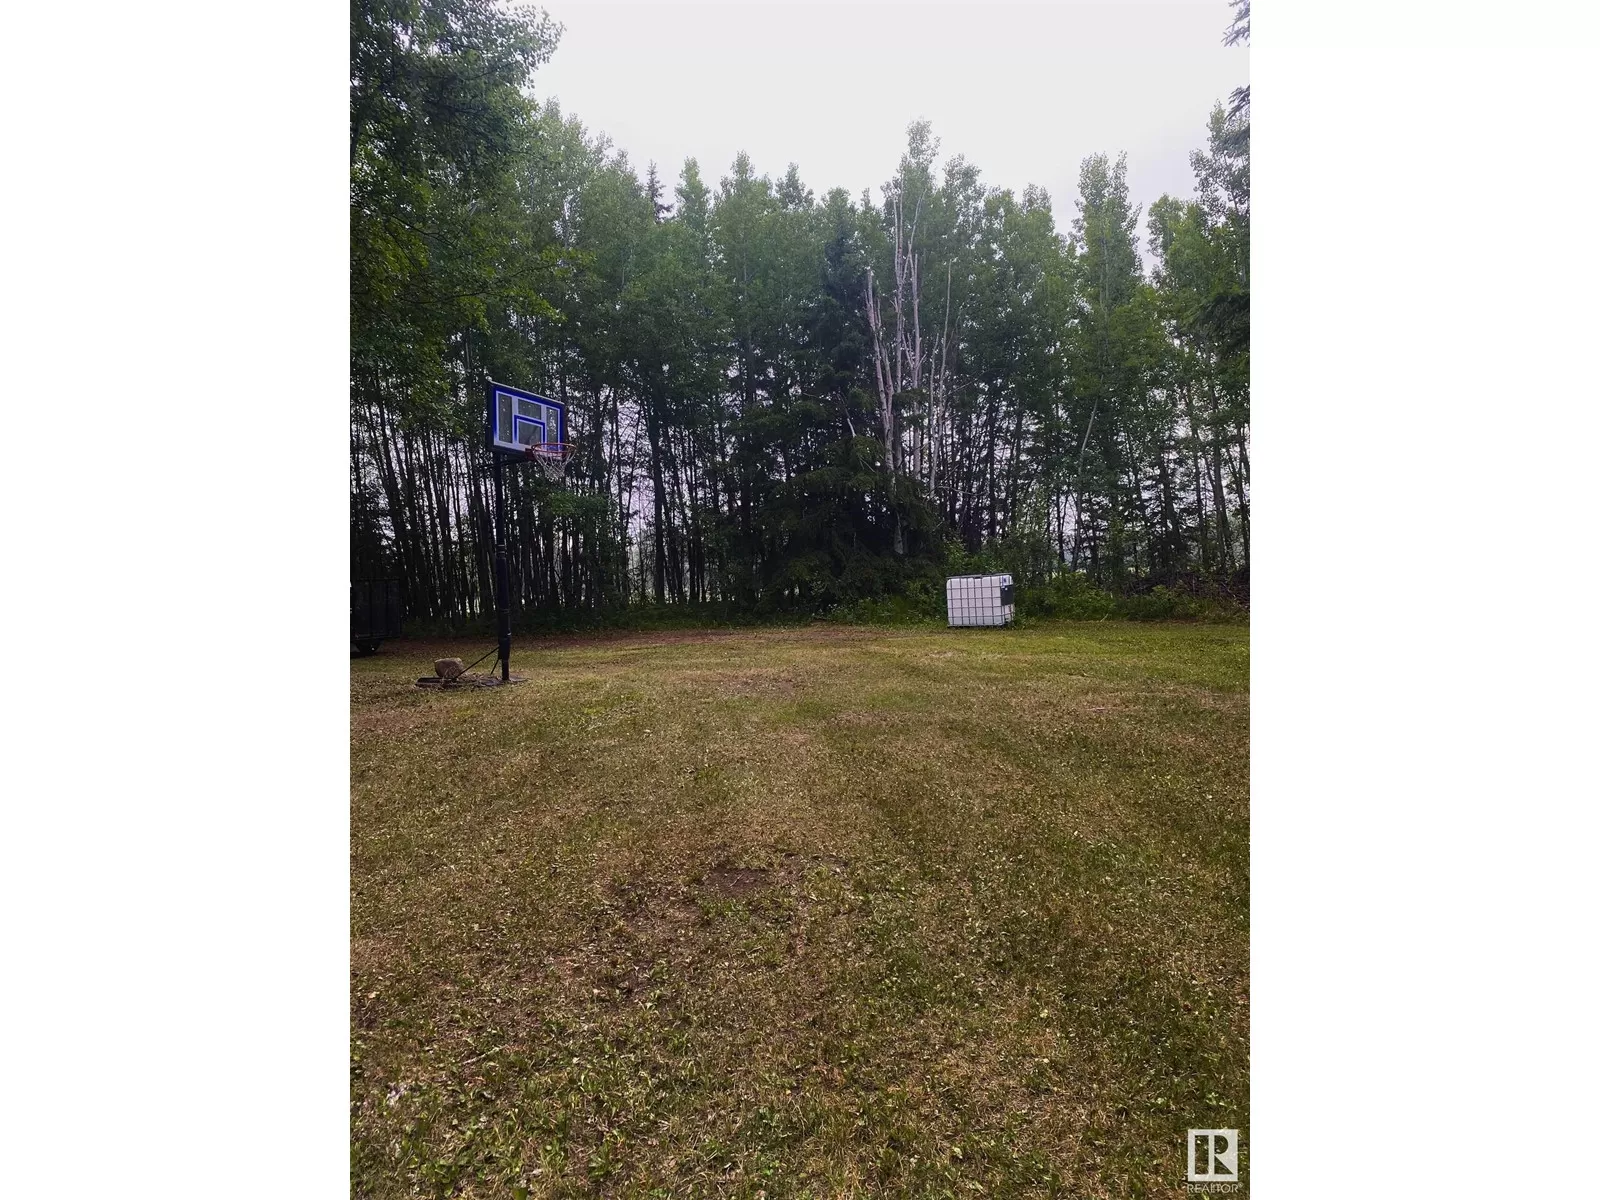 No Building for rent: 1 Twp Rd 462, Rural Wetaskiwin County, Alberta T0C 2V0